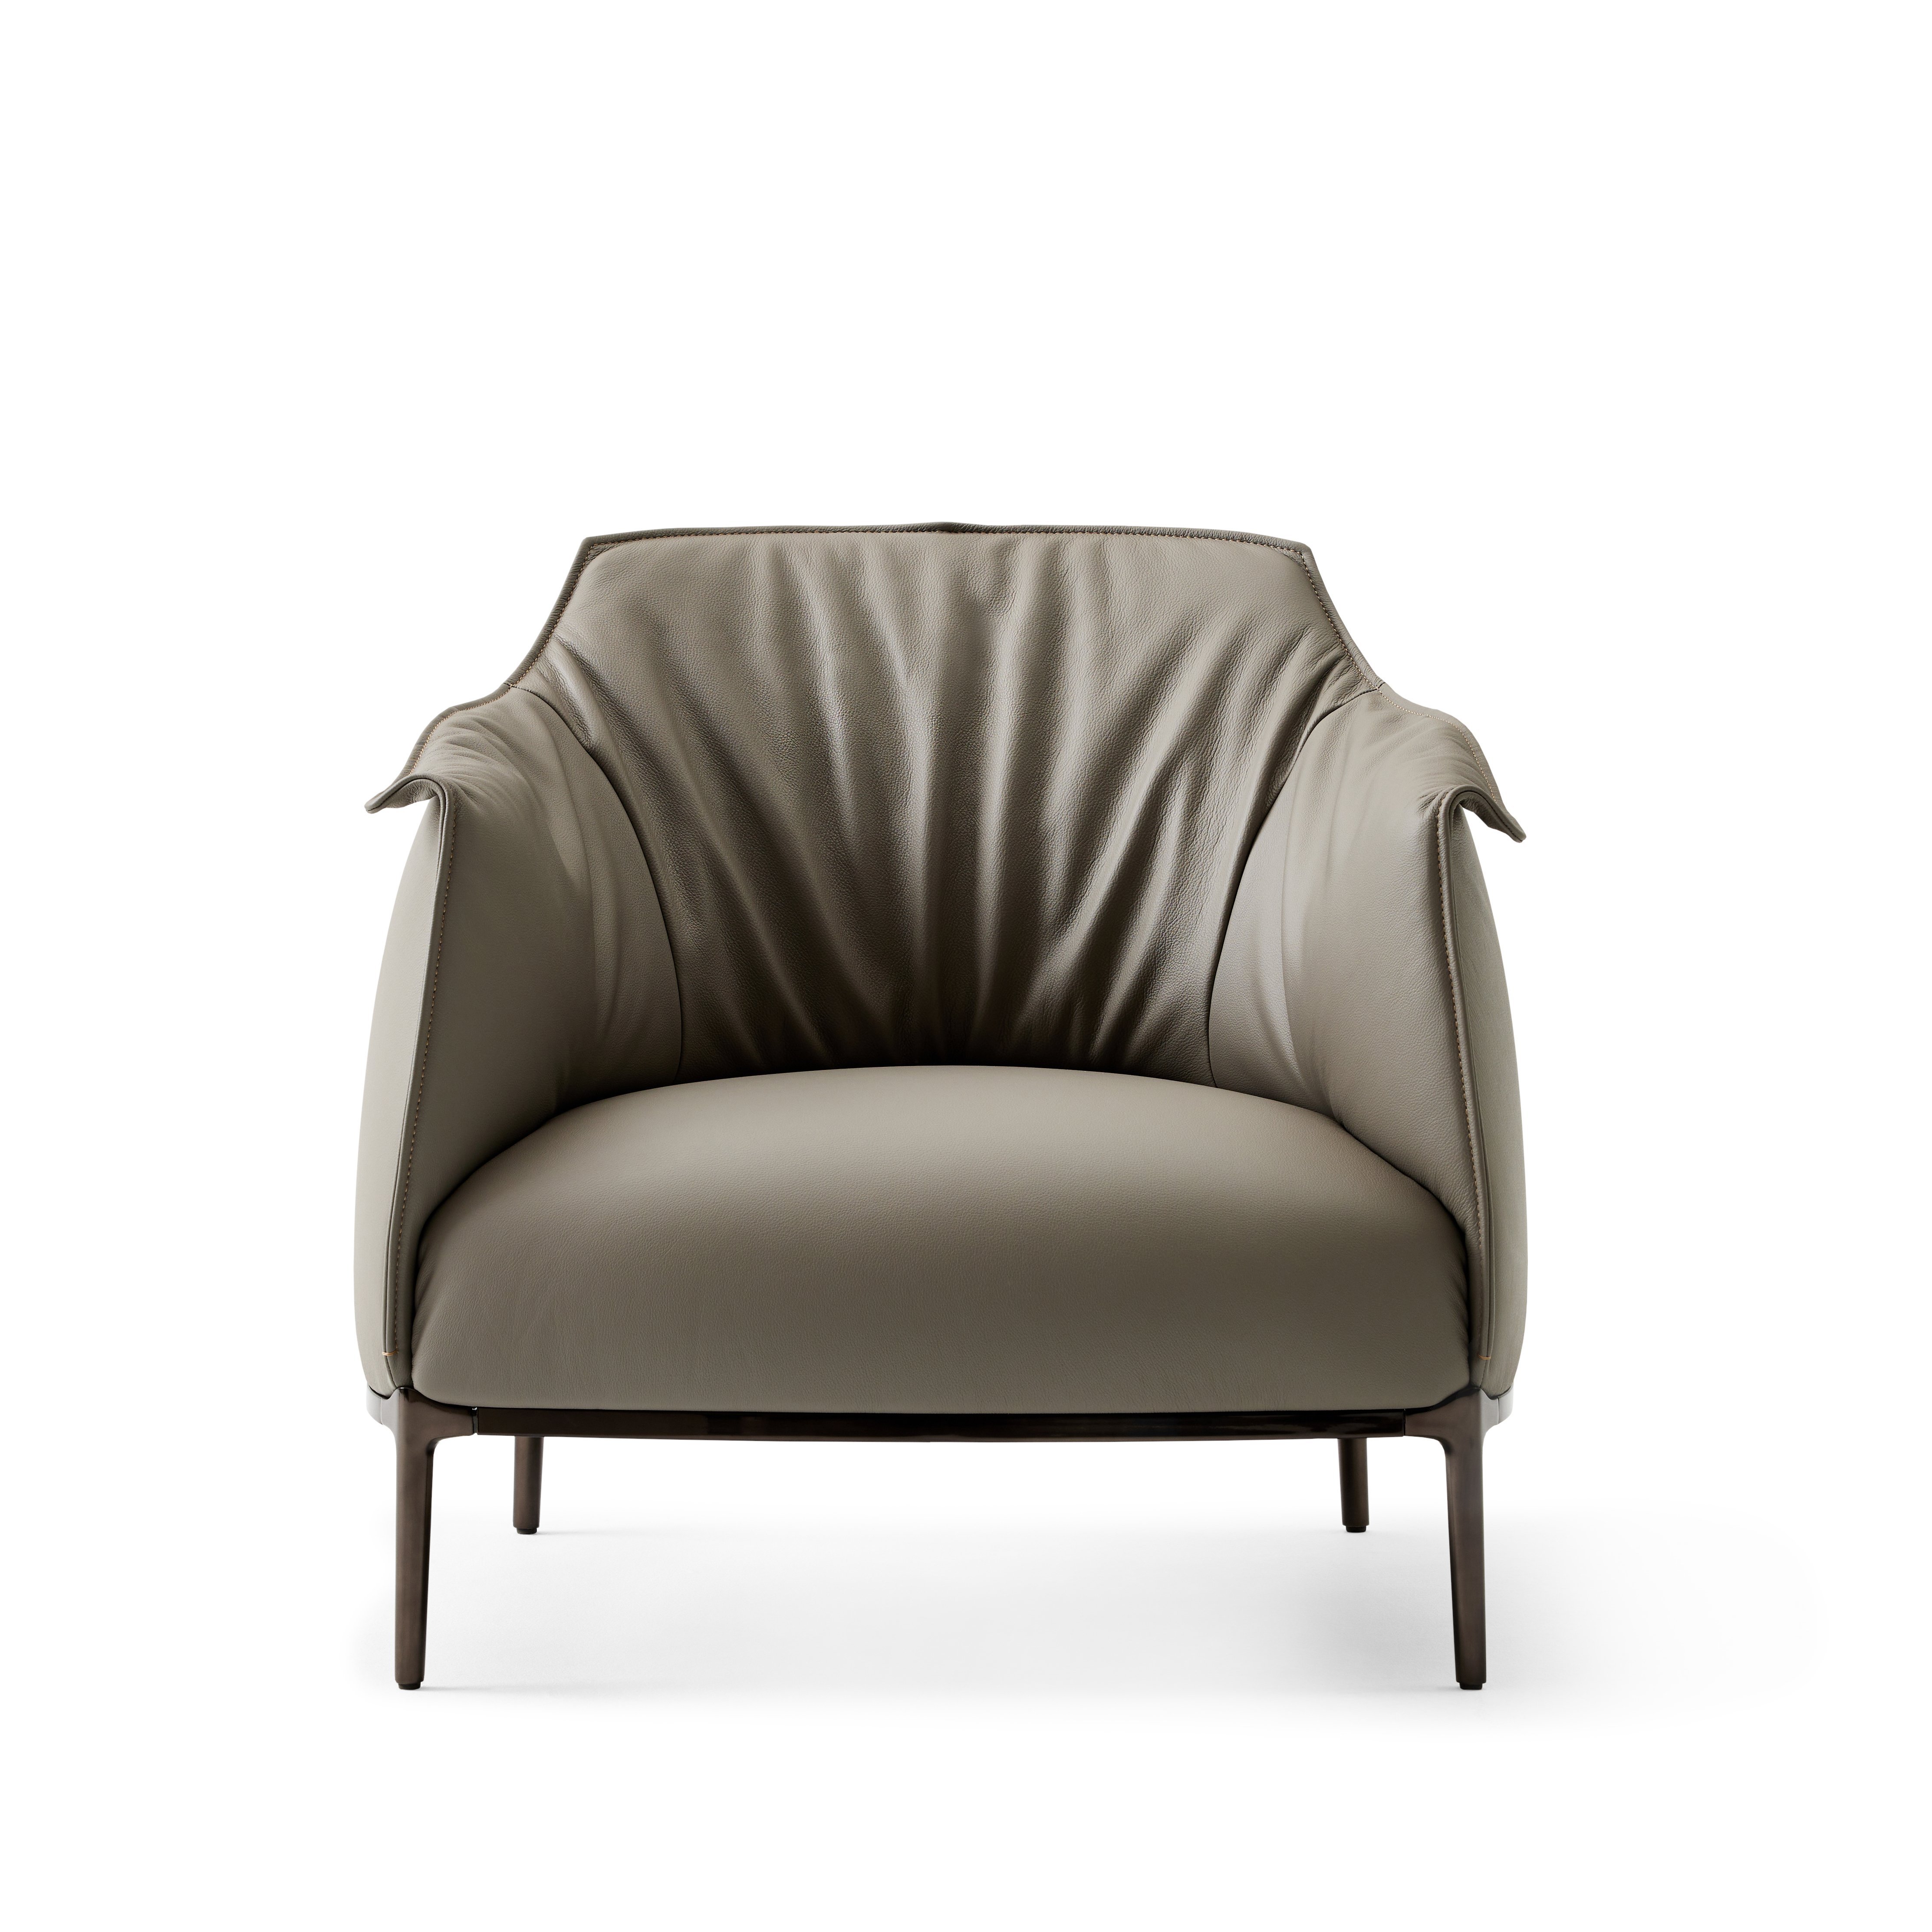 Detail front shot of the Archibald Lounge chair in Gray